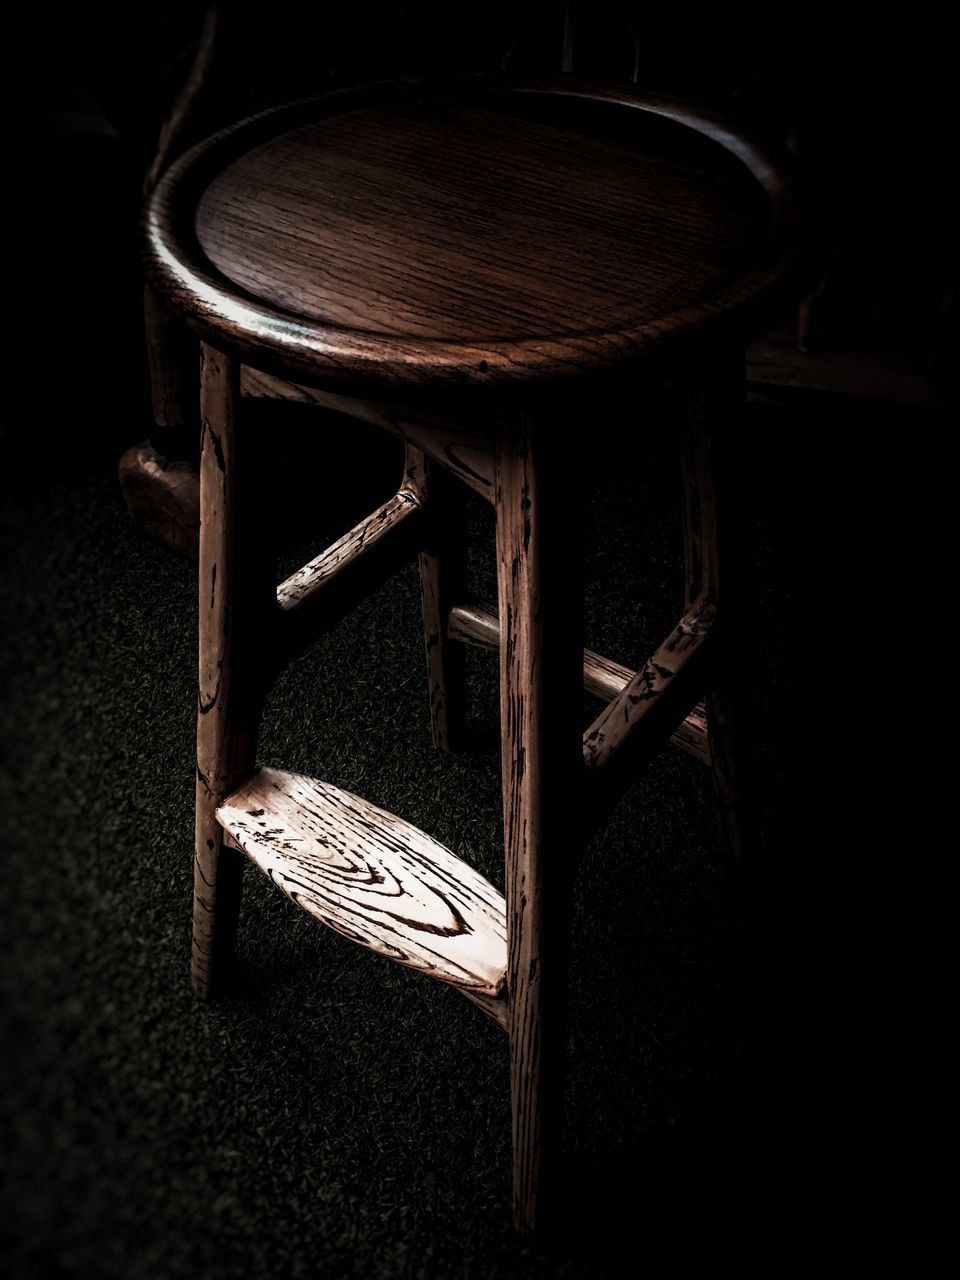 black, furniture, darkness, table, indoors, wood, no people, seat, chair, stool, white, still life, lighting, dark, close-up